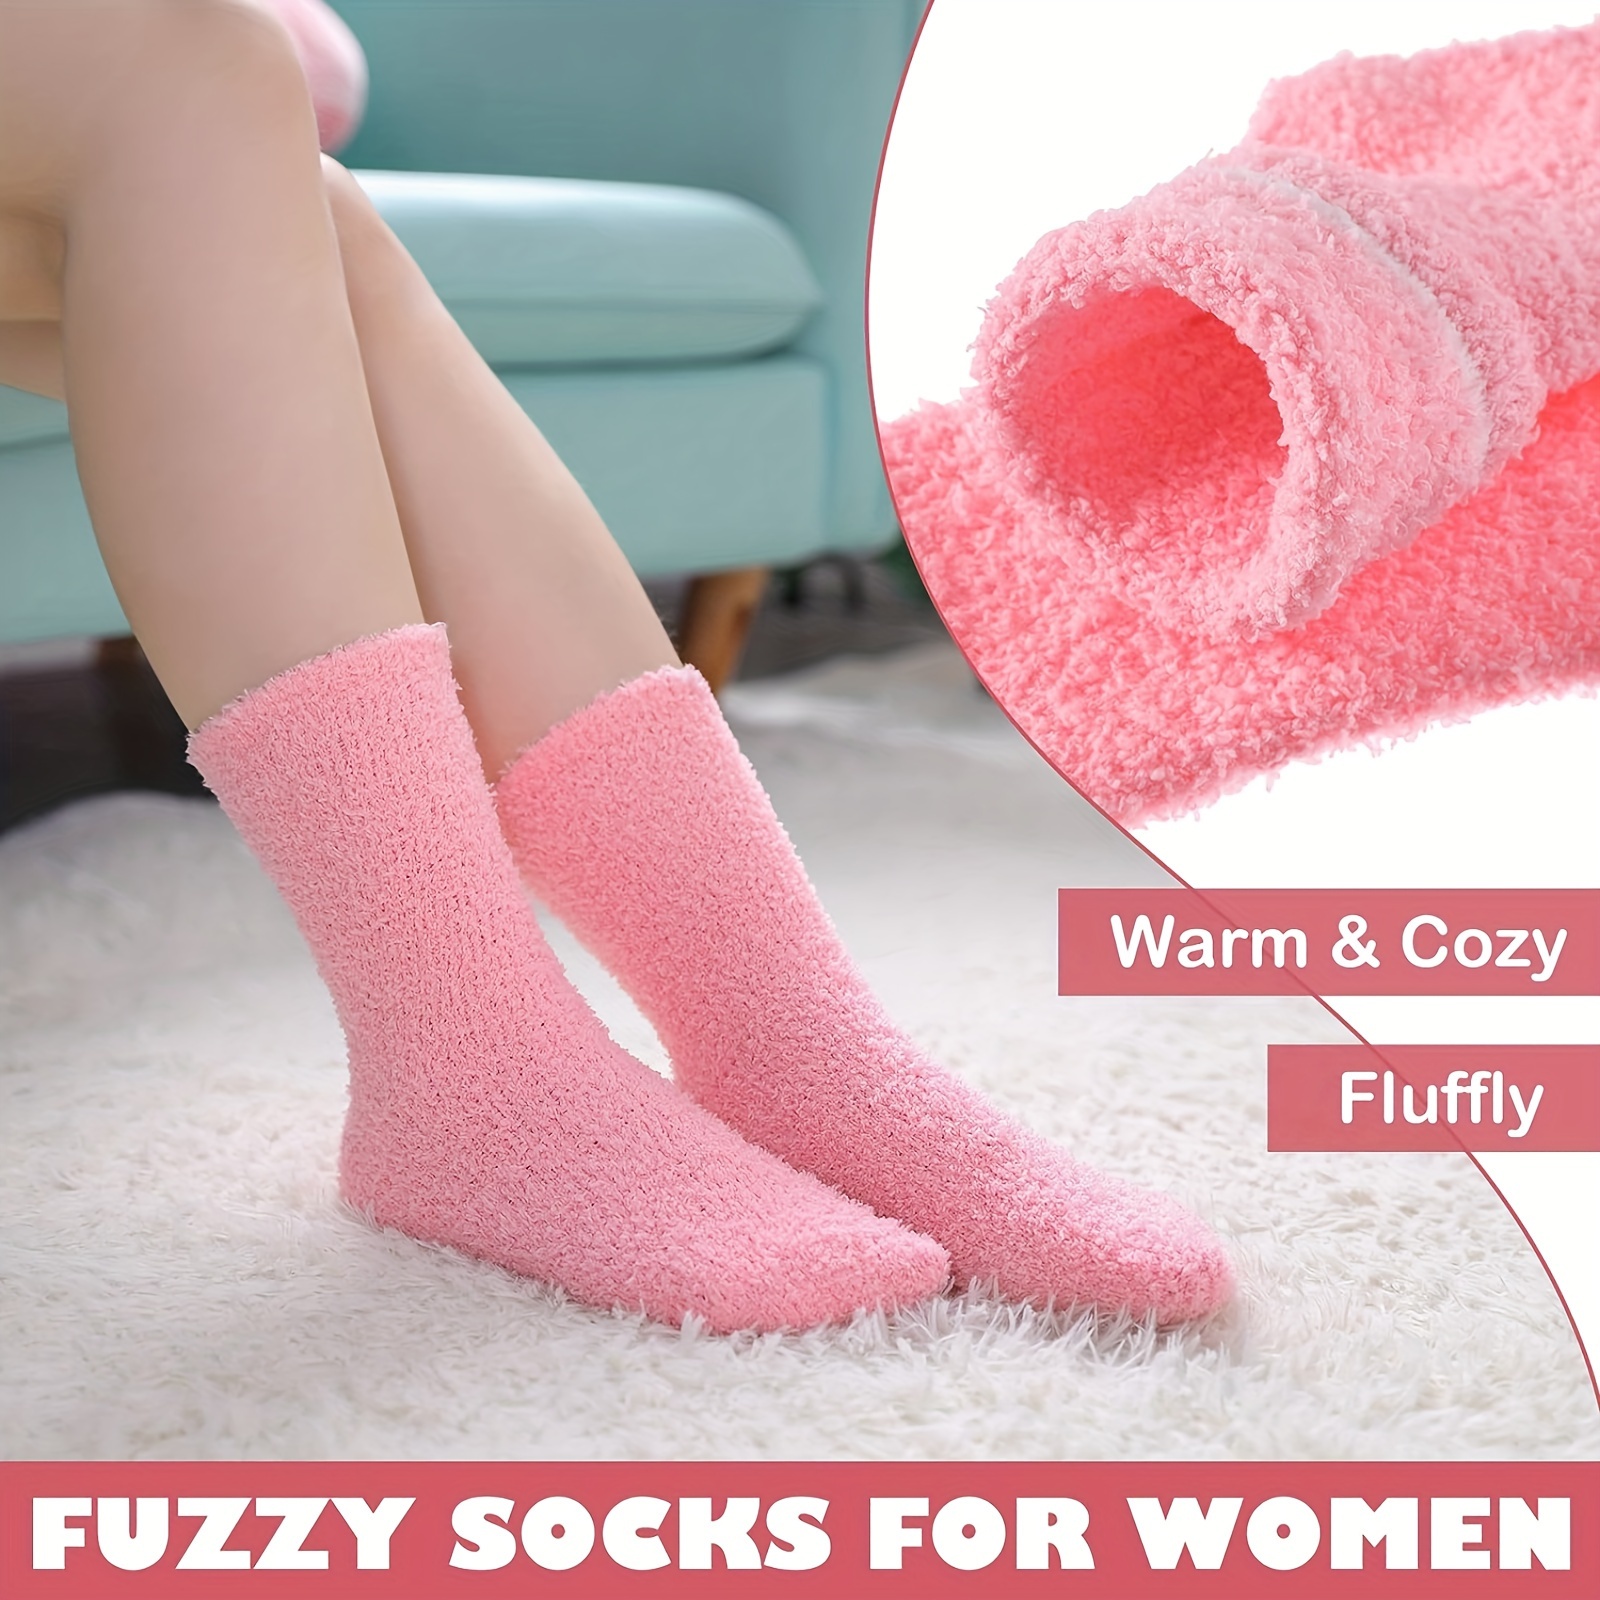 Winter Cozy Fuzzy Socks 5 Pairs - Microfiber Soft Touch, Super Comfy~  Winter